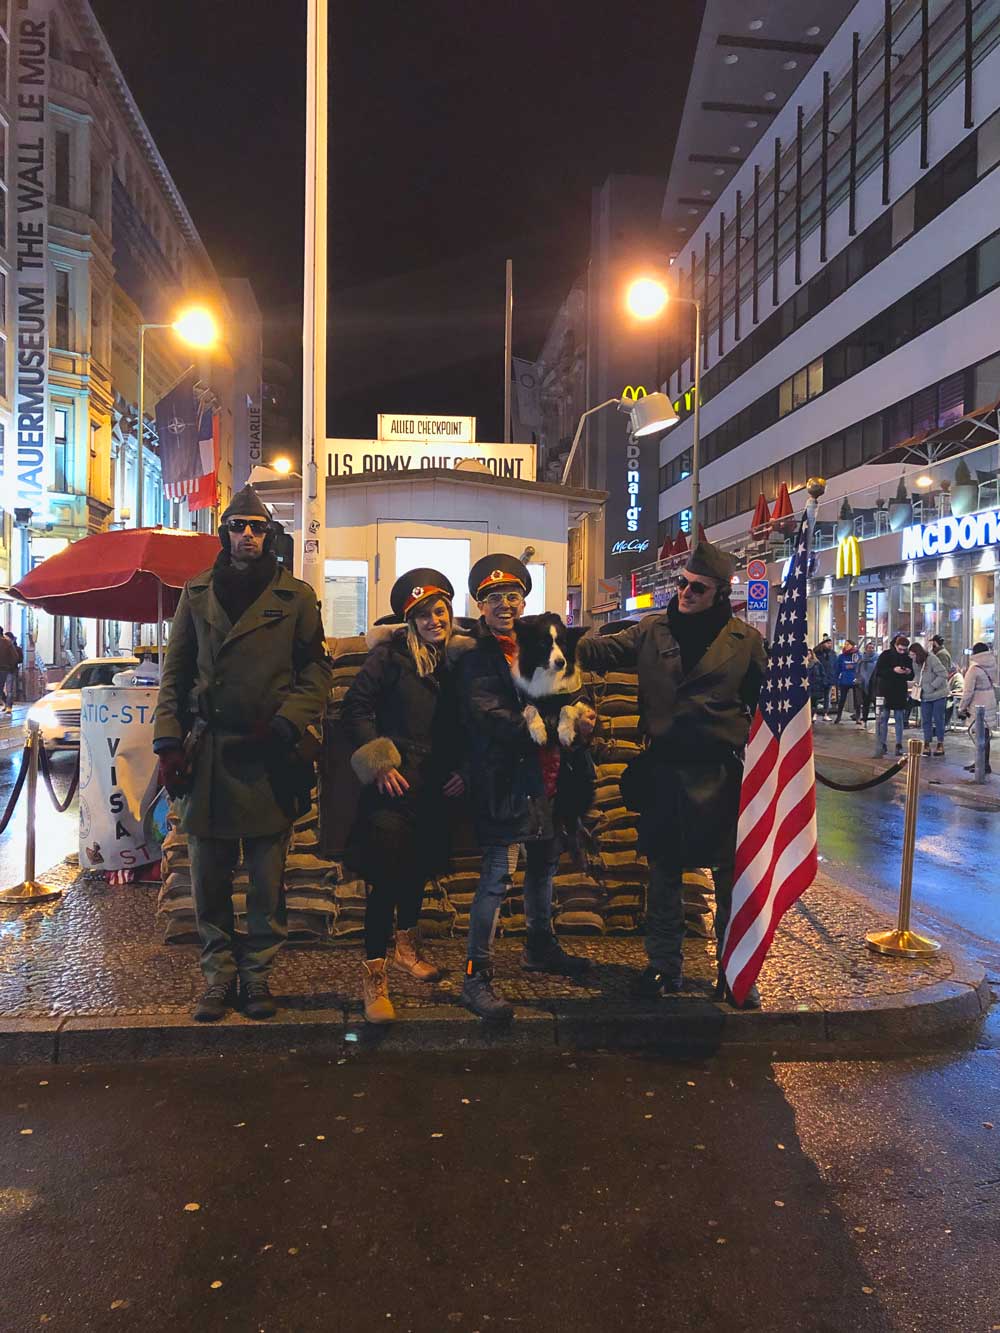 Pedro, Sara and Rafa next to Checkpoint Charlie with soldiers, in Berlin, Germany.